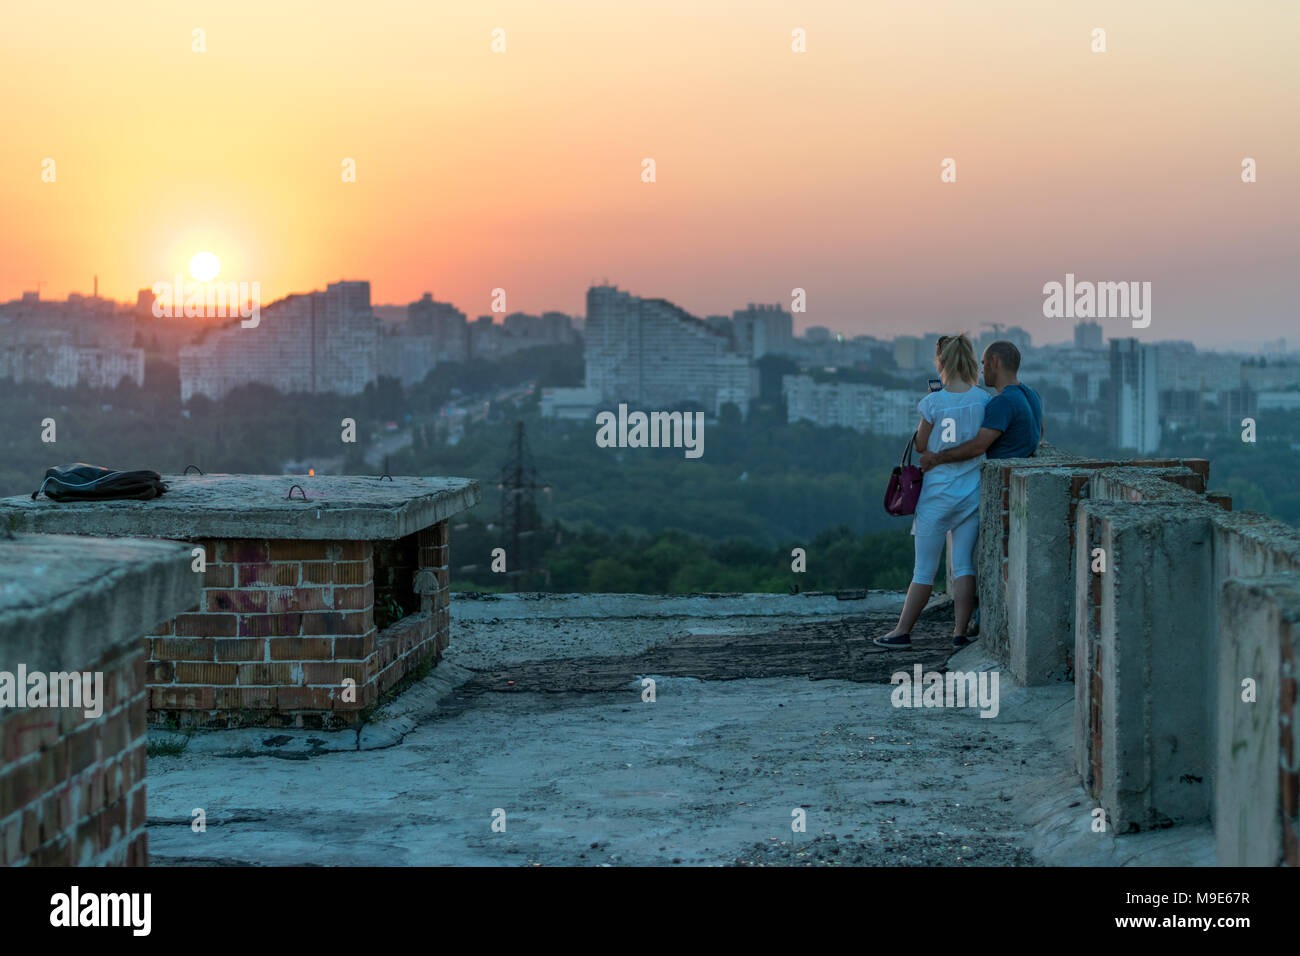 CHISINAU, MOLDOVA - 14 JULY, 2016: View from a roof to the two buildings called the Gates of the city in Chisinau Stock Photo